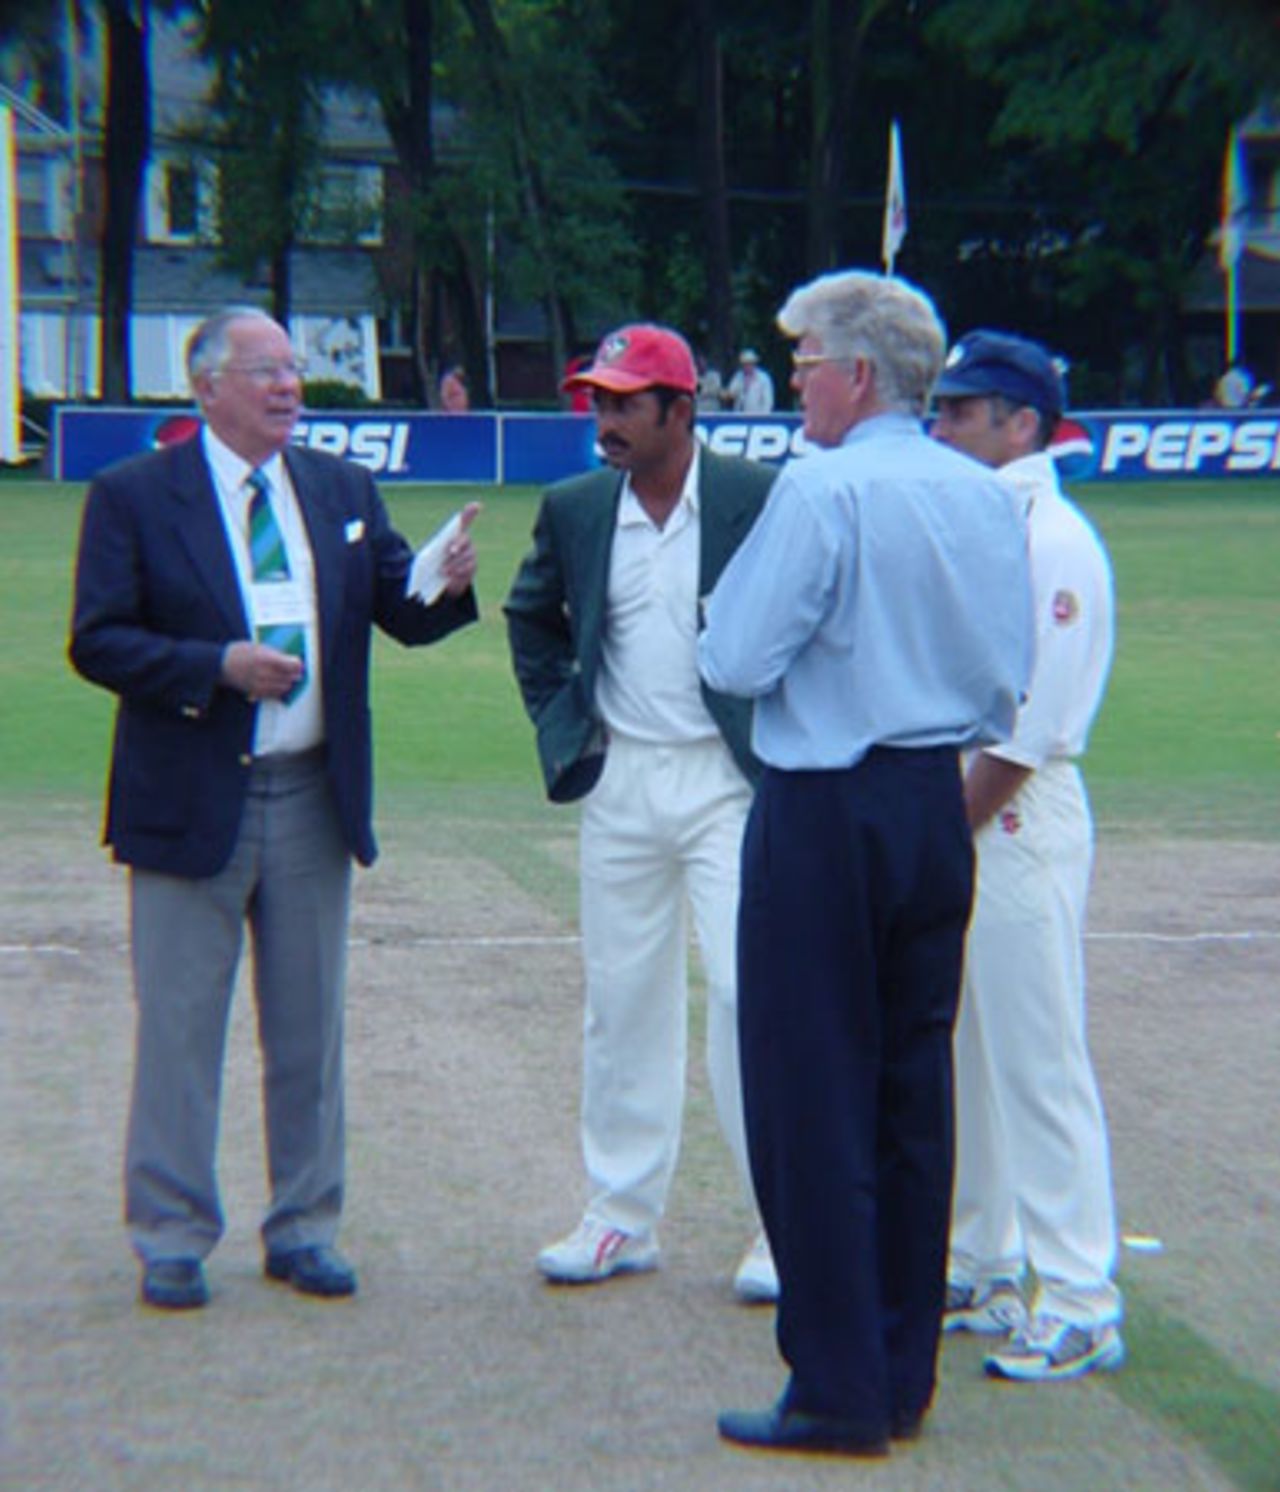 West Indian match referee Jackie Hendriks about to toss the coin for the ICC Trophy World Cup Qualifying Final. Canadian captain Joe Harris, television commentator and former South African Test batsman Barry Richards and Scottish captain George Salmond look on. ICC Trophy 2001: Canada v Scotland at Toronto Cricket, Skating and Curling Club, 17 July 2001.